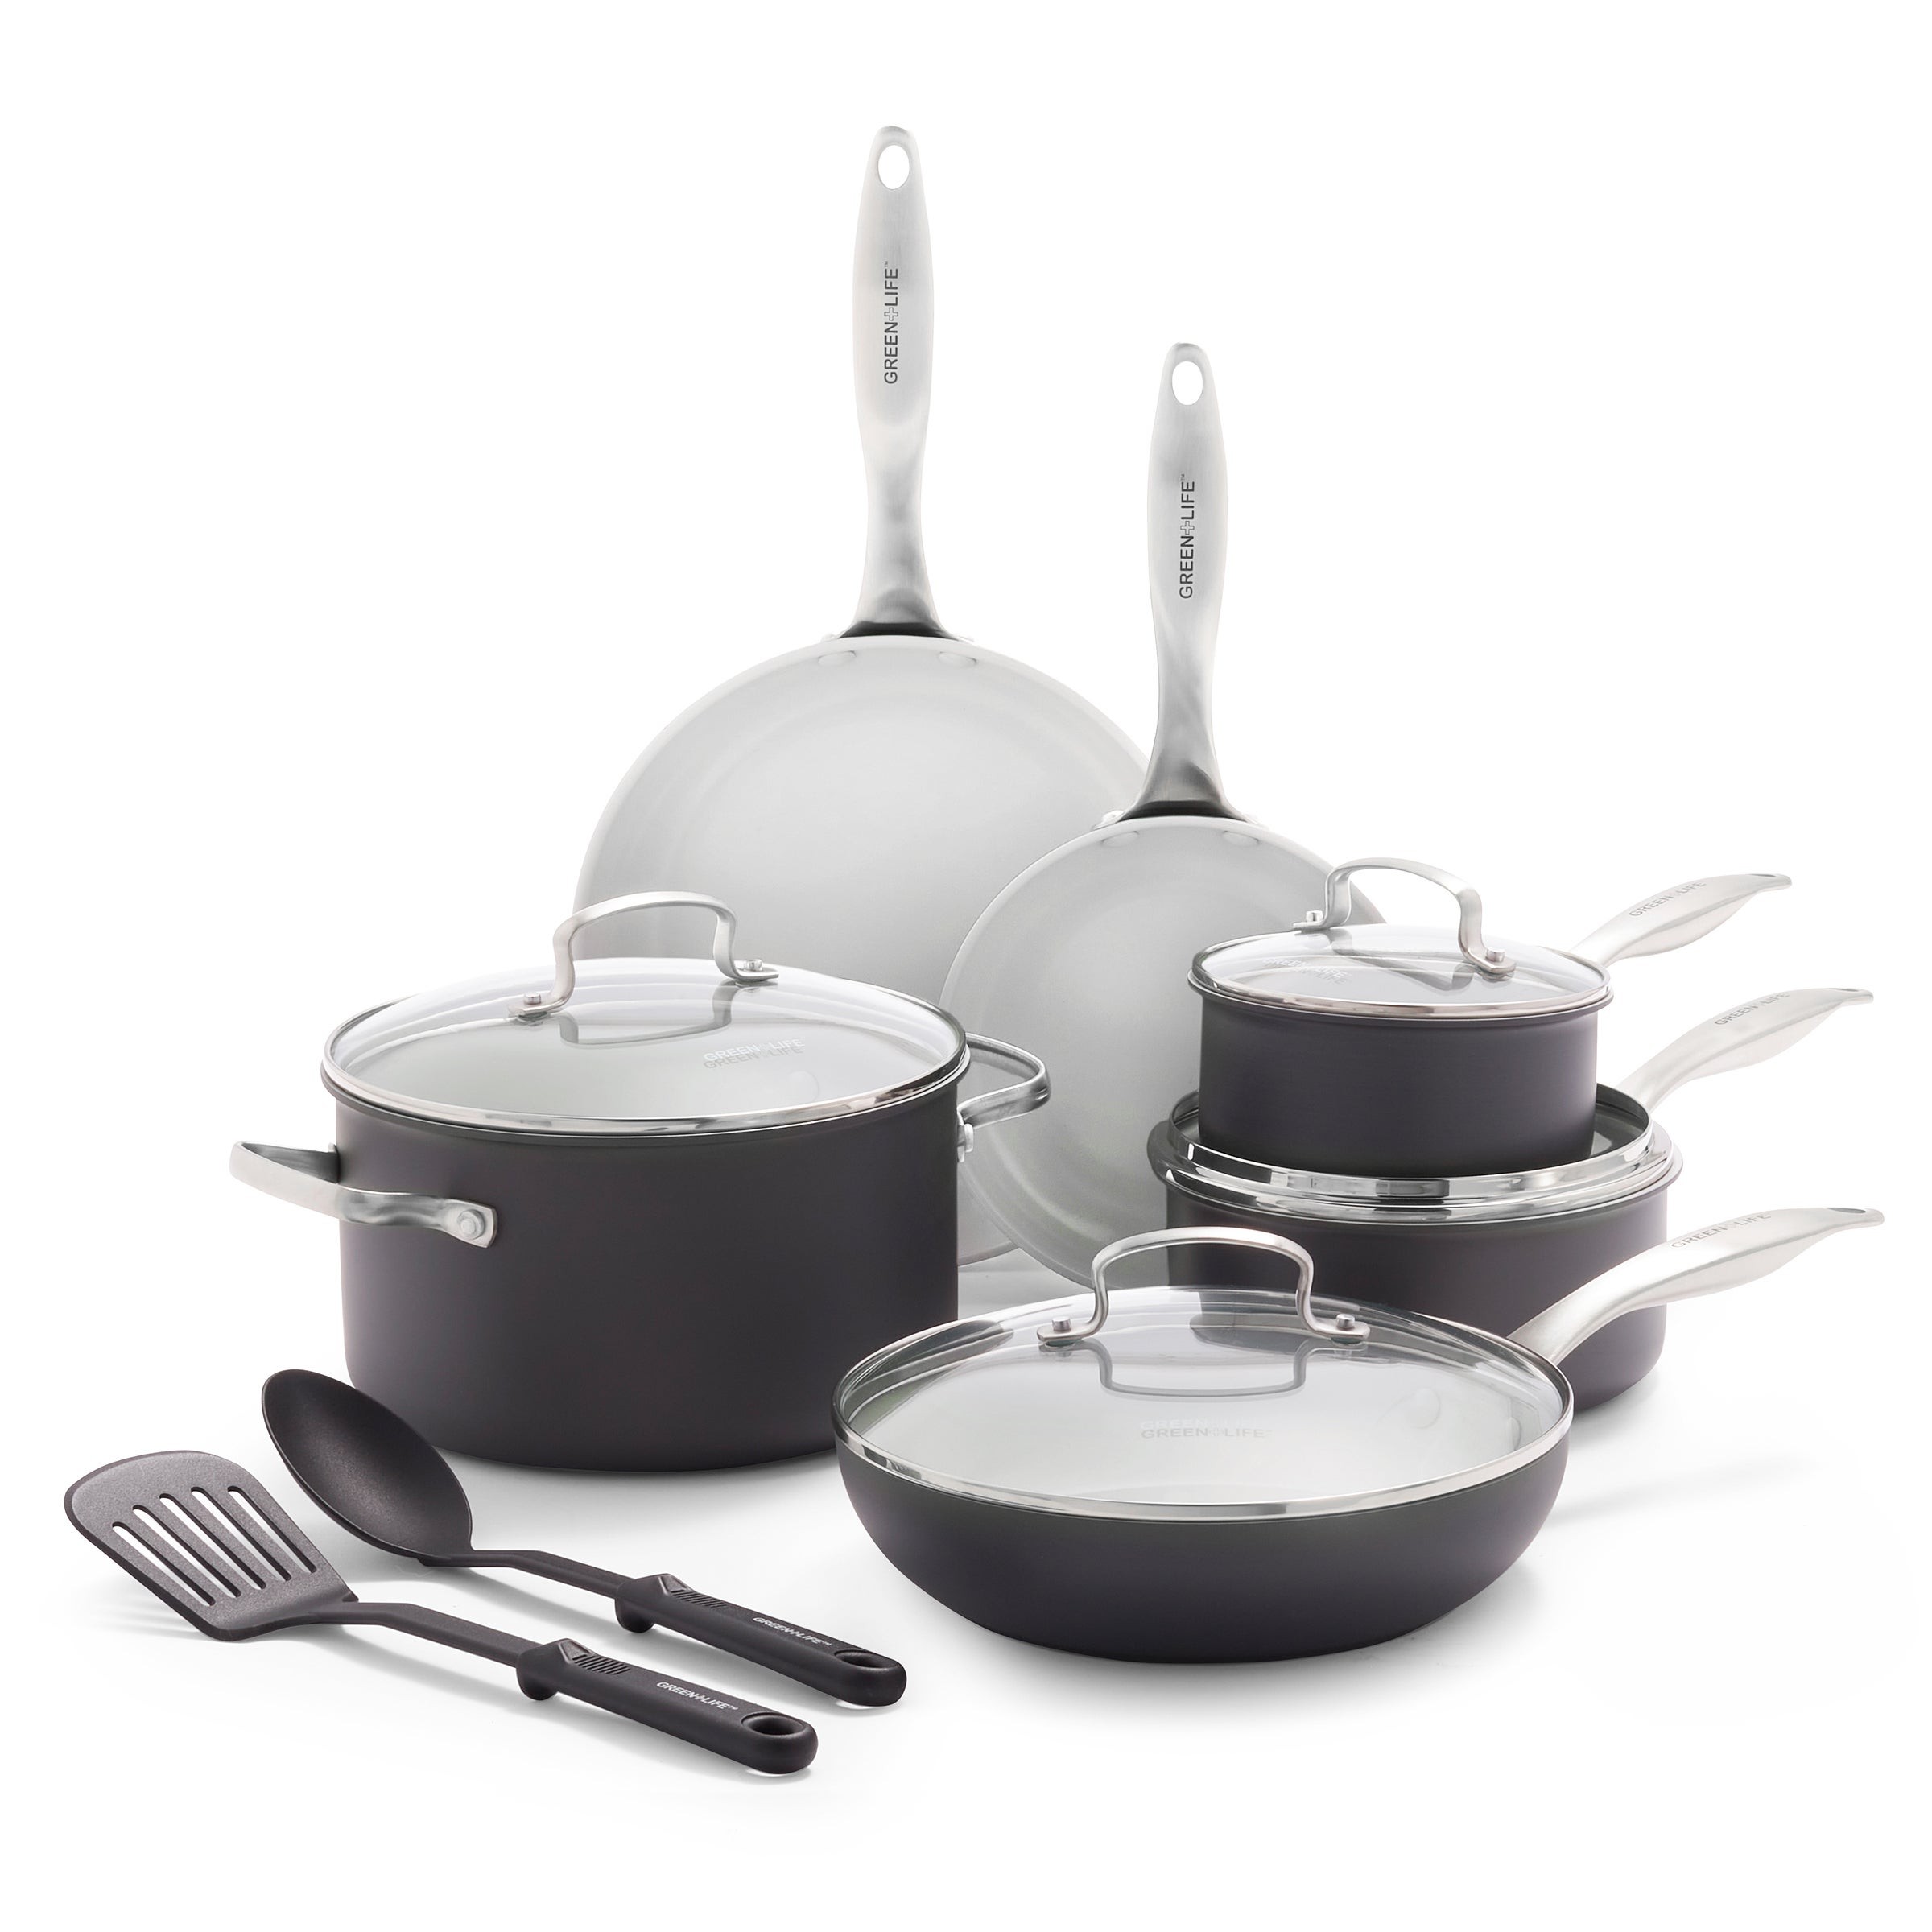 Classic Pro 12pc Hard Anodized Nonstick Cookware Set